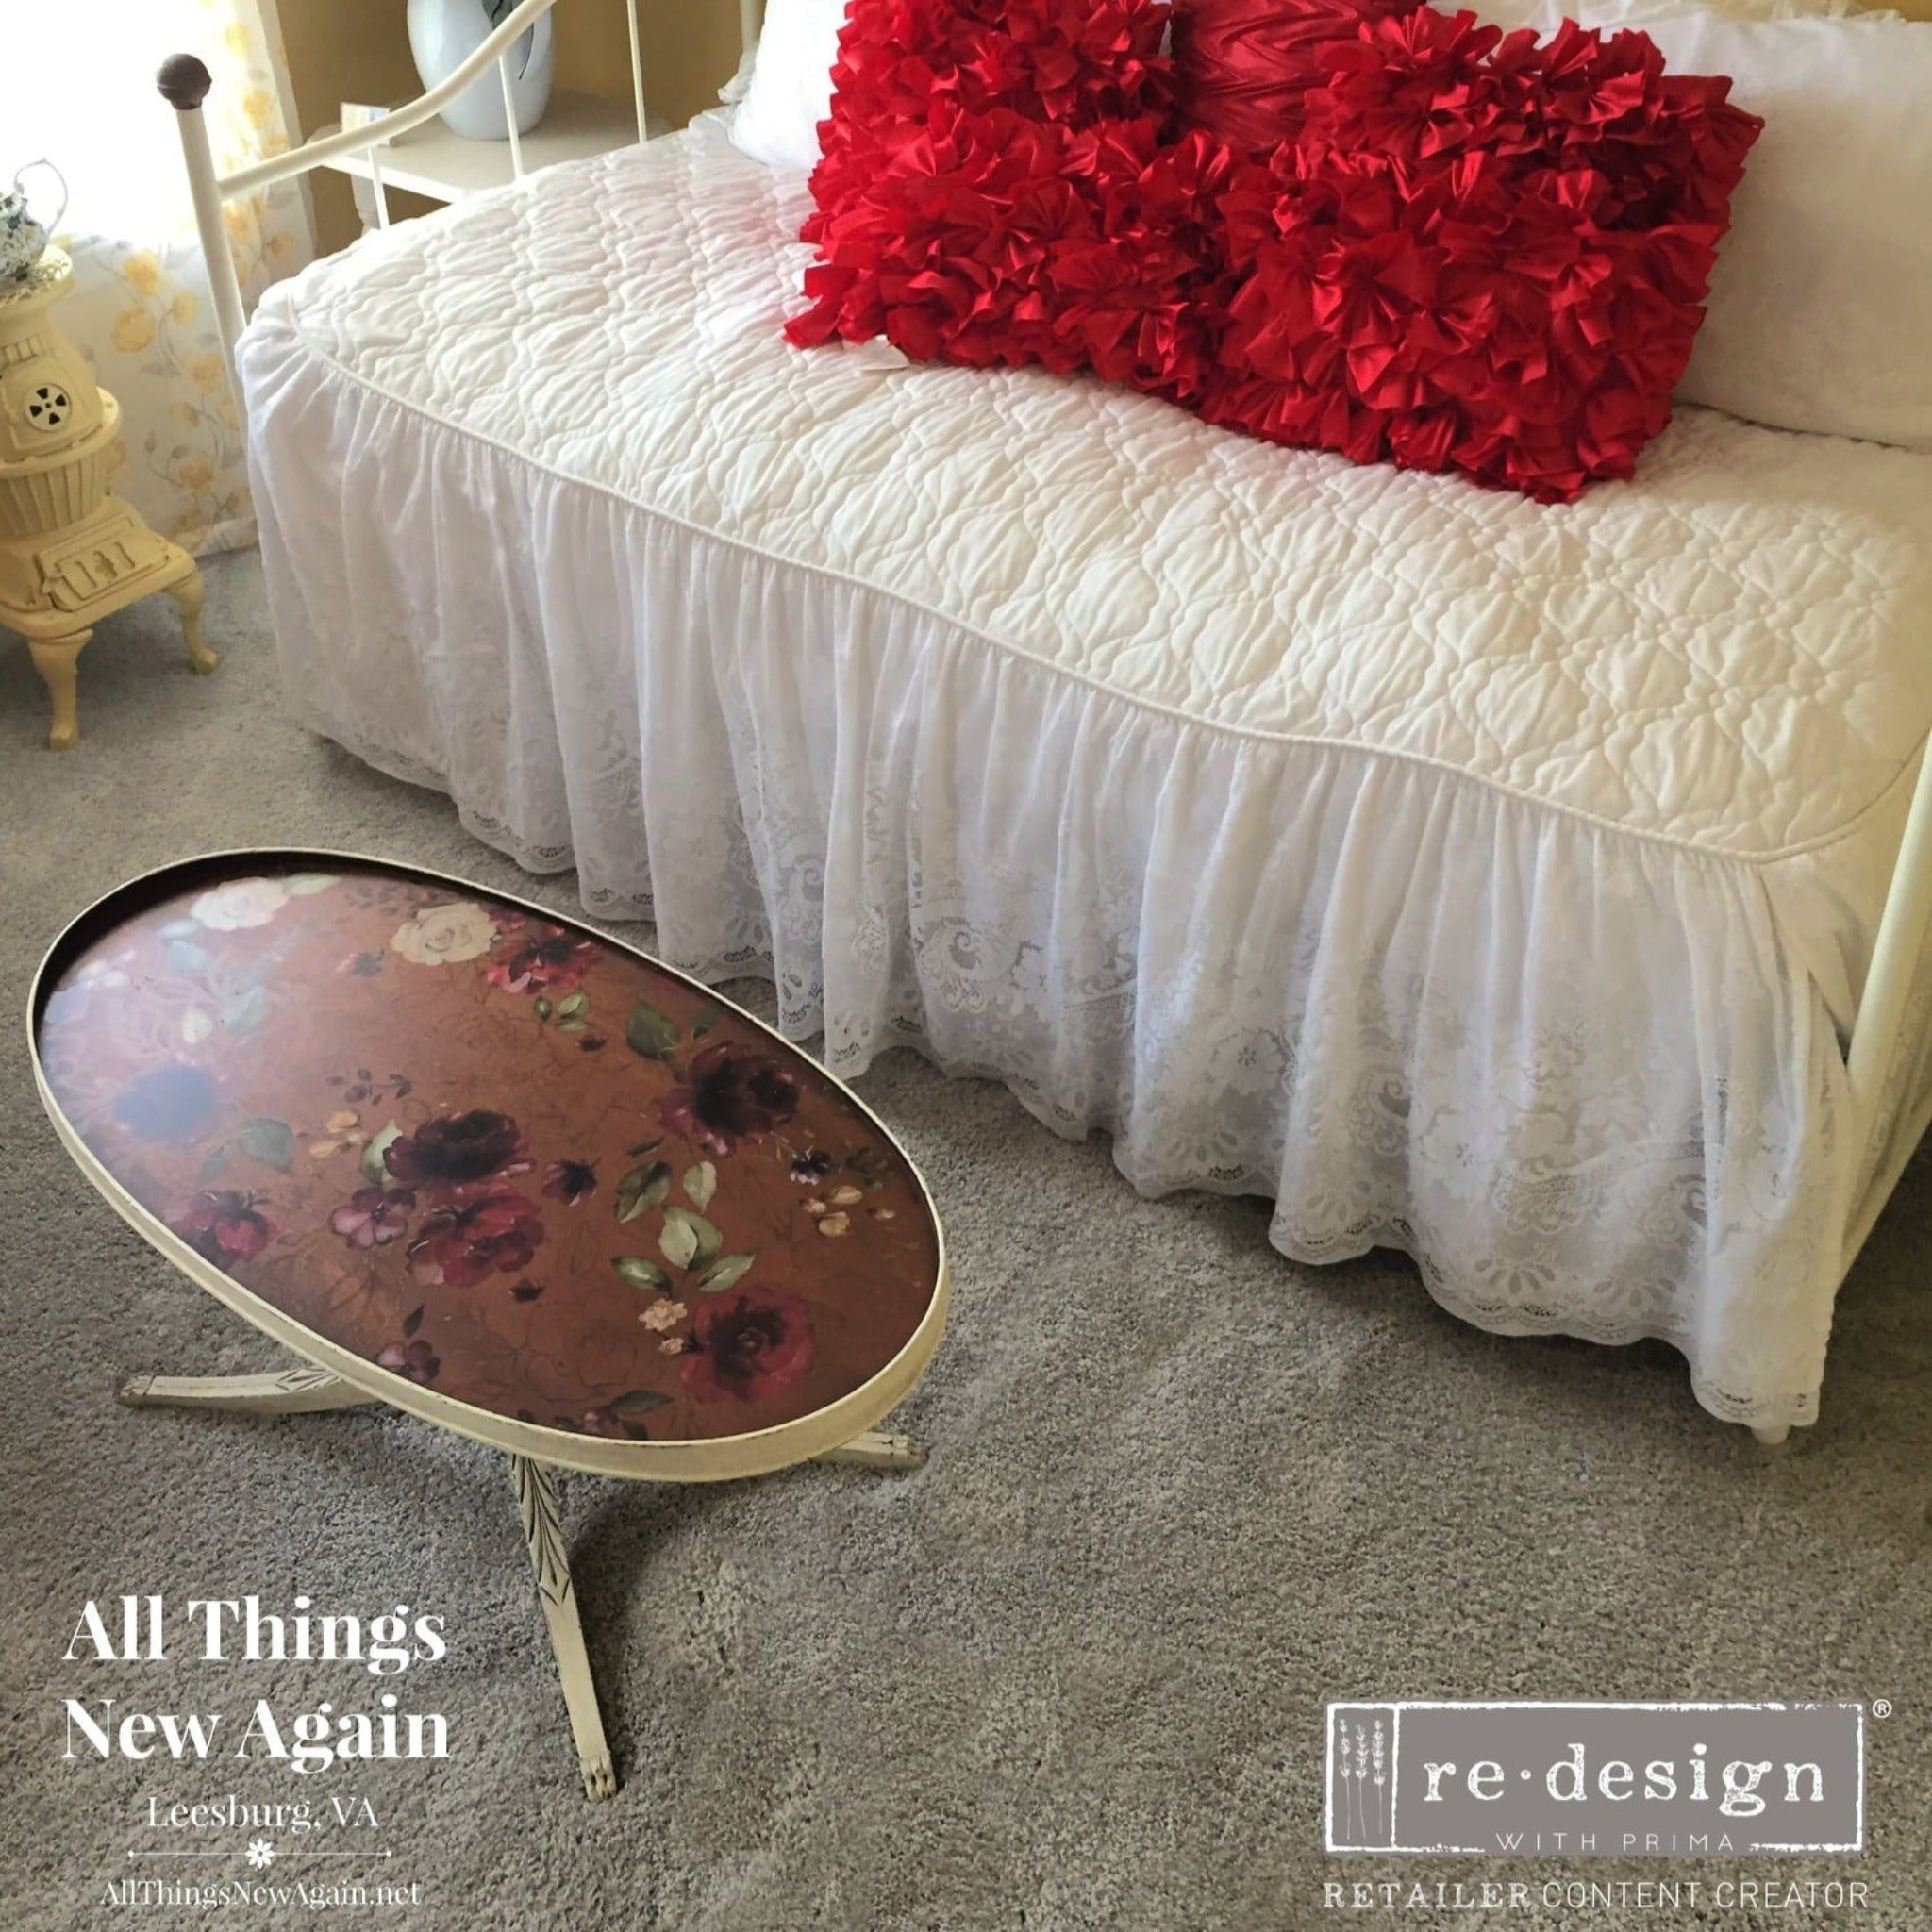 An oval vintage coffee table refurbished by All Things New Again is painted a light cream color on the legs and around the table top. The table top is a natural dark wood and features ReDesign with Prima's Midnight Floral transfer on it. A daybed with a white duvet cover and red pillow is also in the photo.